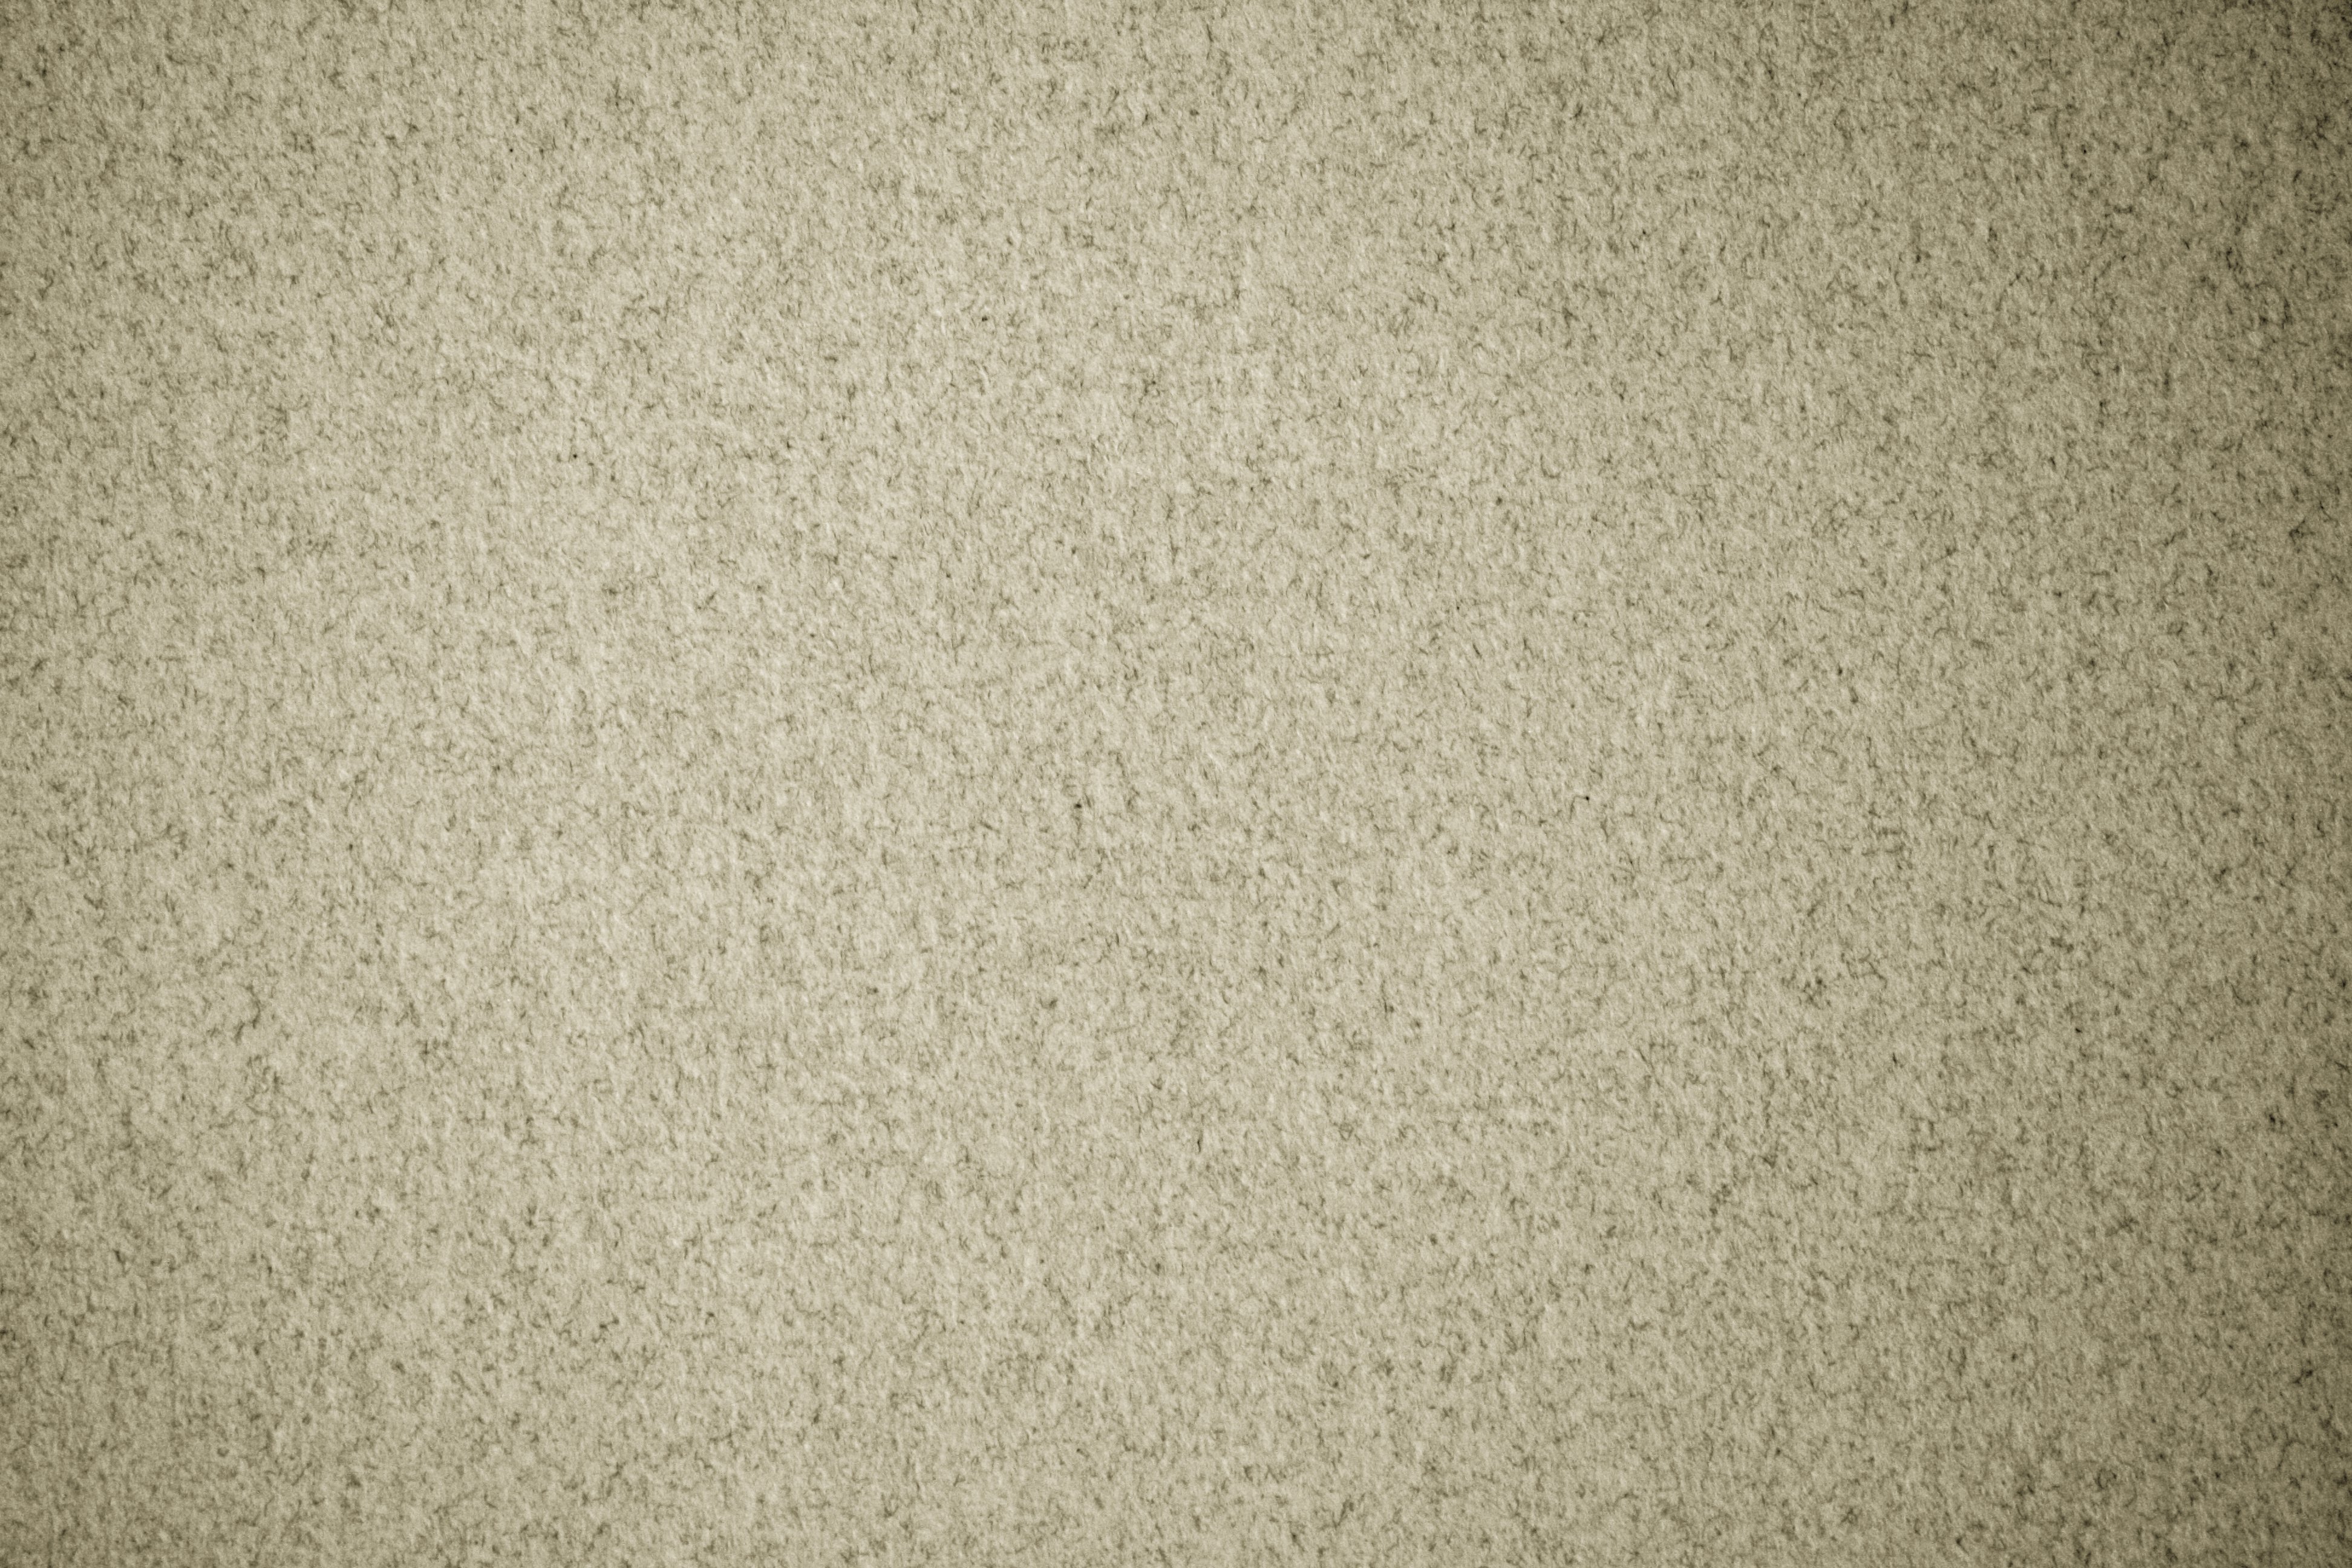 Brown Paper Texture with Flecks Picture, Free Photograph